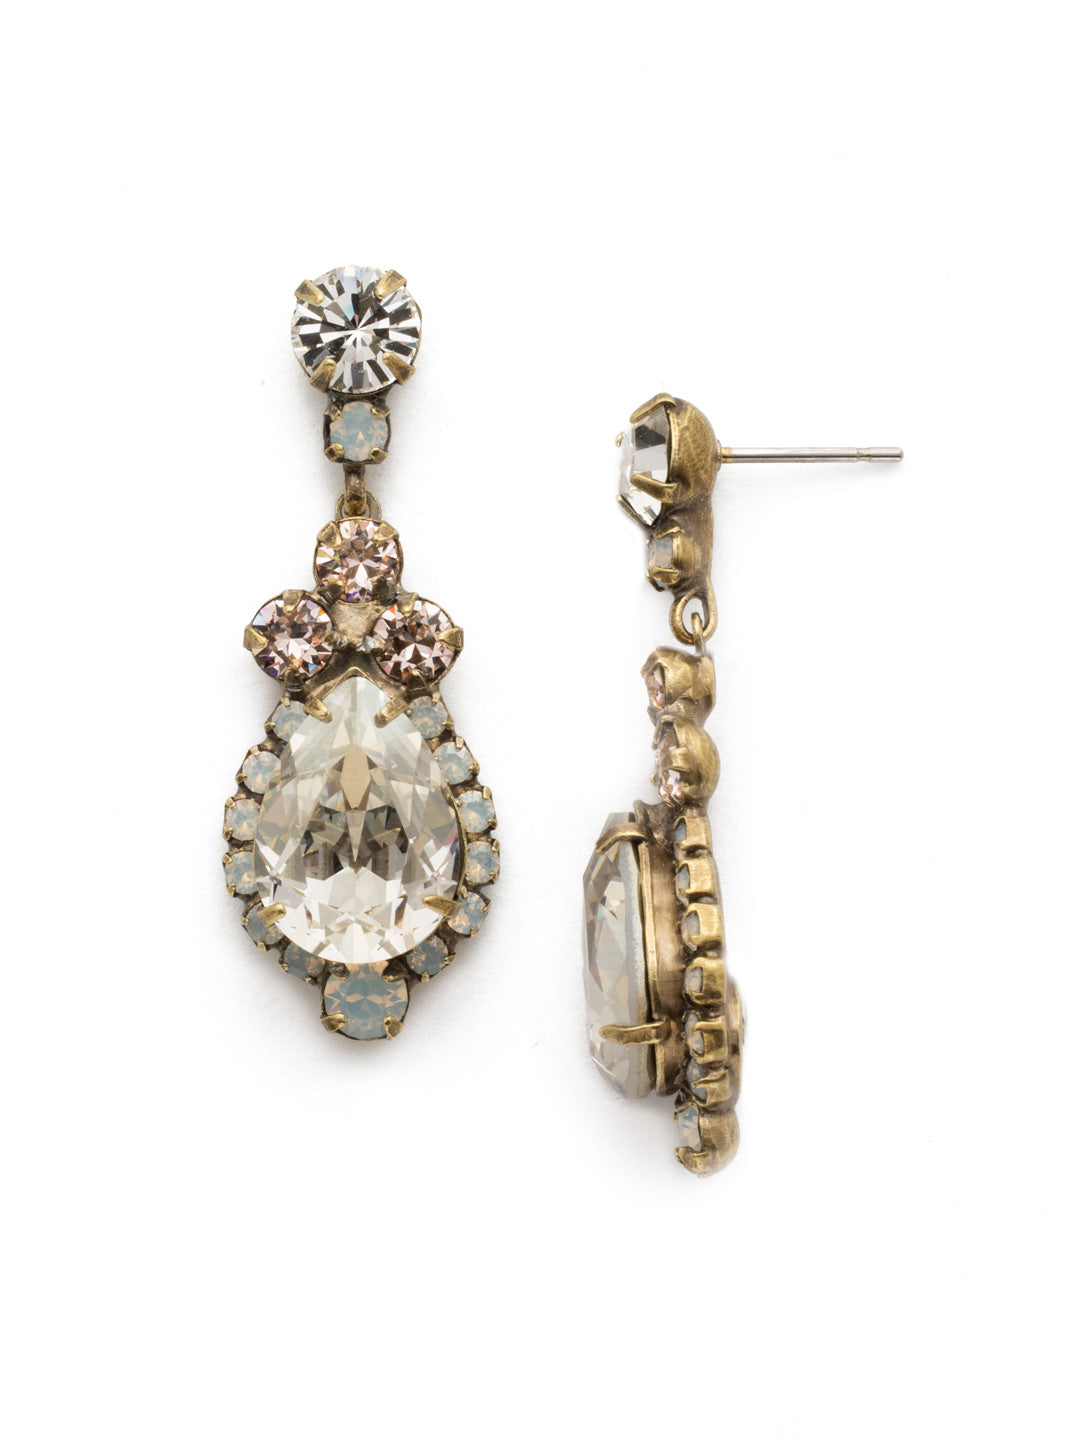 Central Teardrop and Round Crystal Dangle Earrings - EDA55AGCLA - Drops of dazzle! A teardrop shaped crystal surrounded by rhinestones dangle from a round crystal post. From Sorrelli's Crystal Lace collection in our Antique Gold-tone finish.